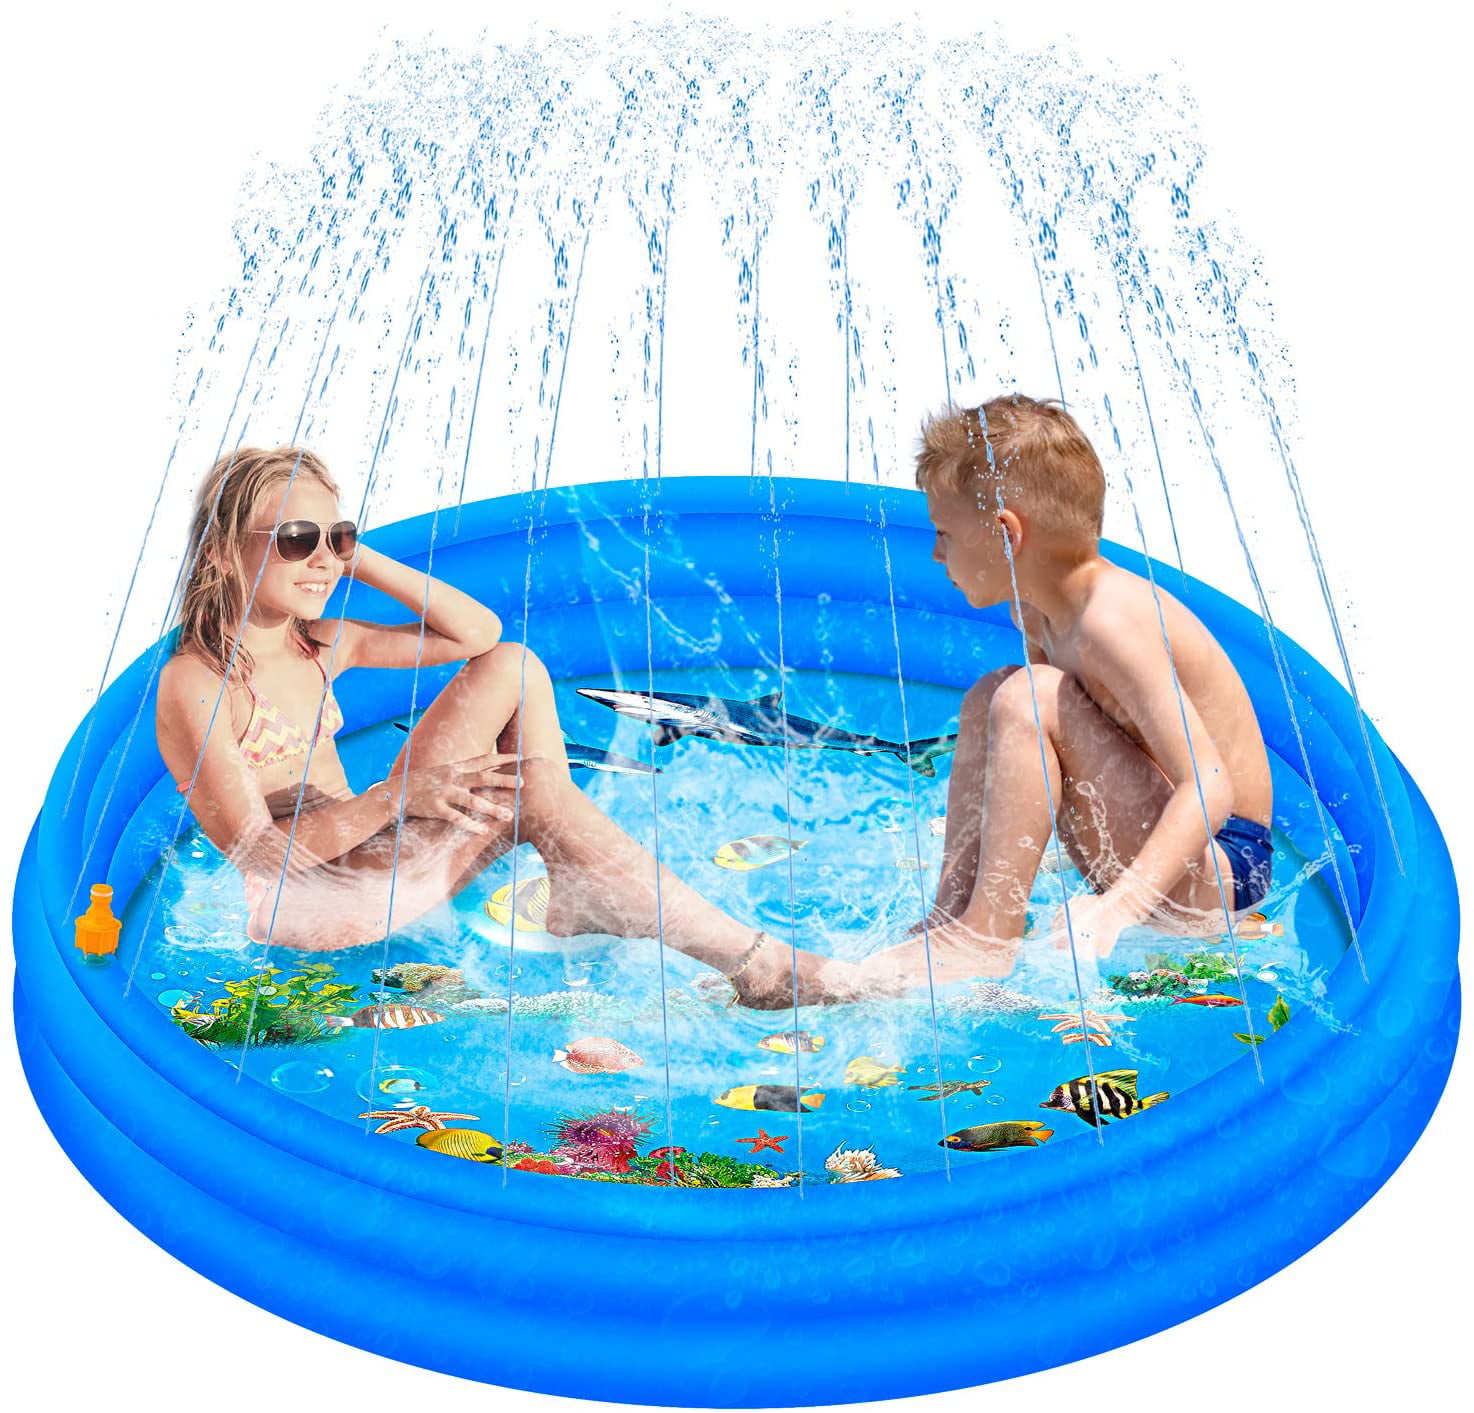 WOGOON Inflatable Splash Pad Sprinkler Play Mat Outdoor Wading Shallow Water Pad Toys for Boys Girls Children Dogs Upgraded Summer Kiddie Baby Swimming Pool 